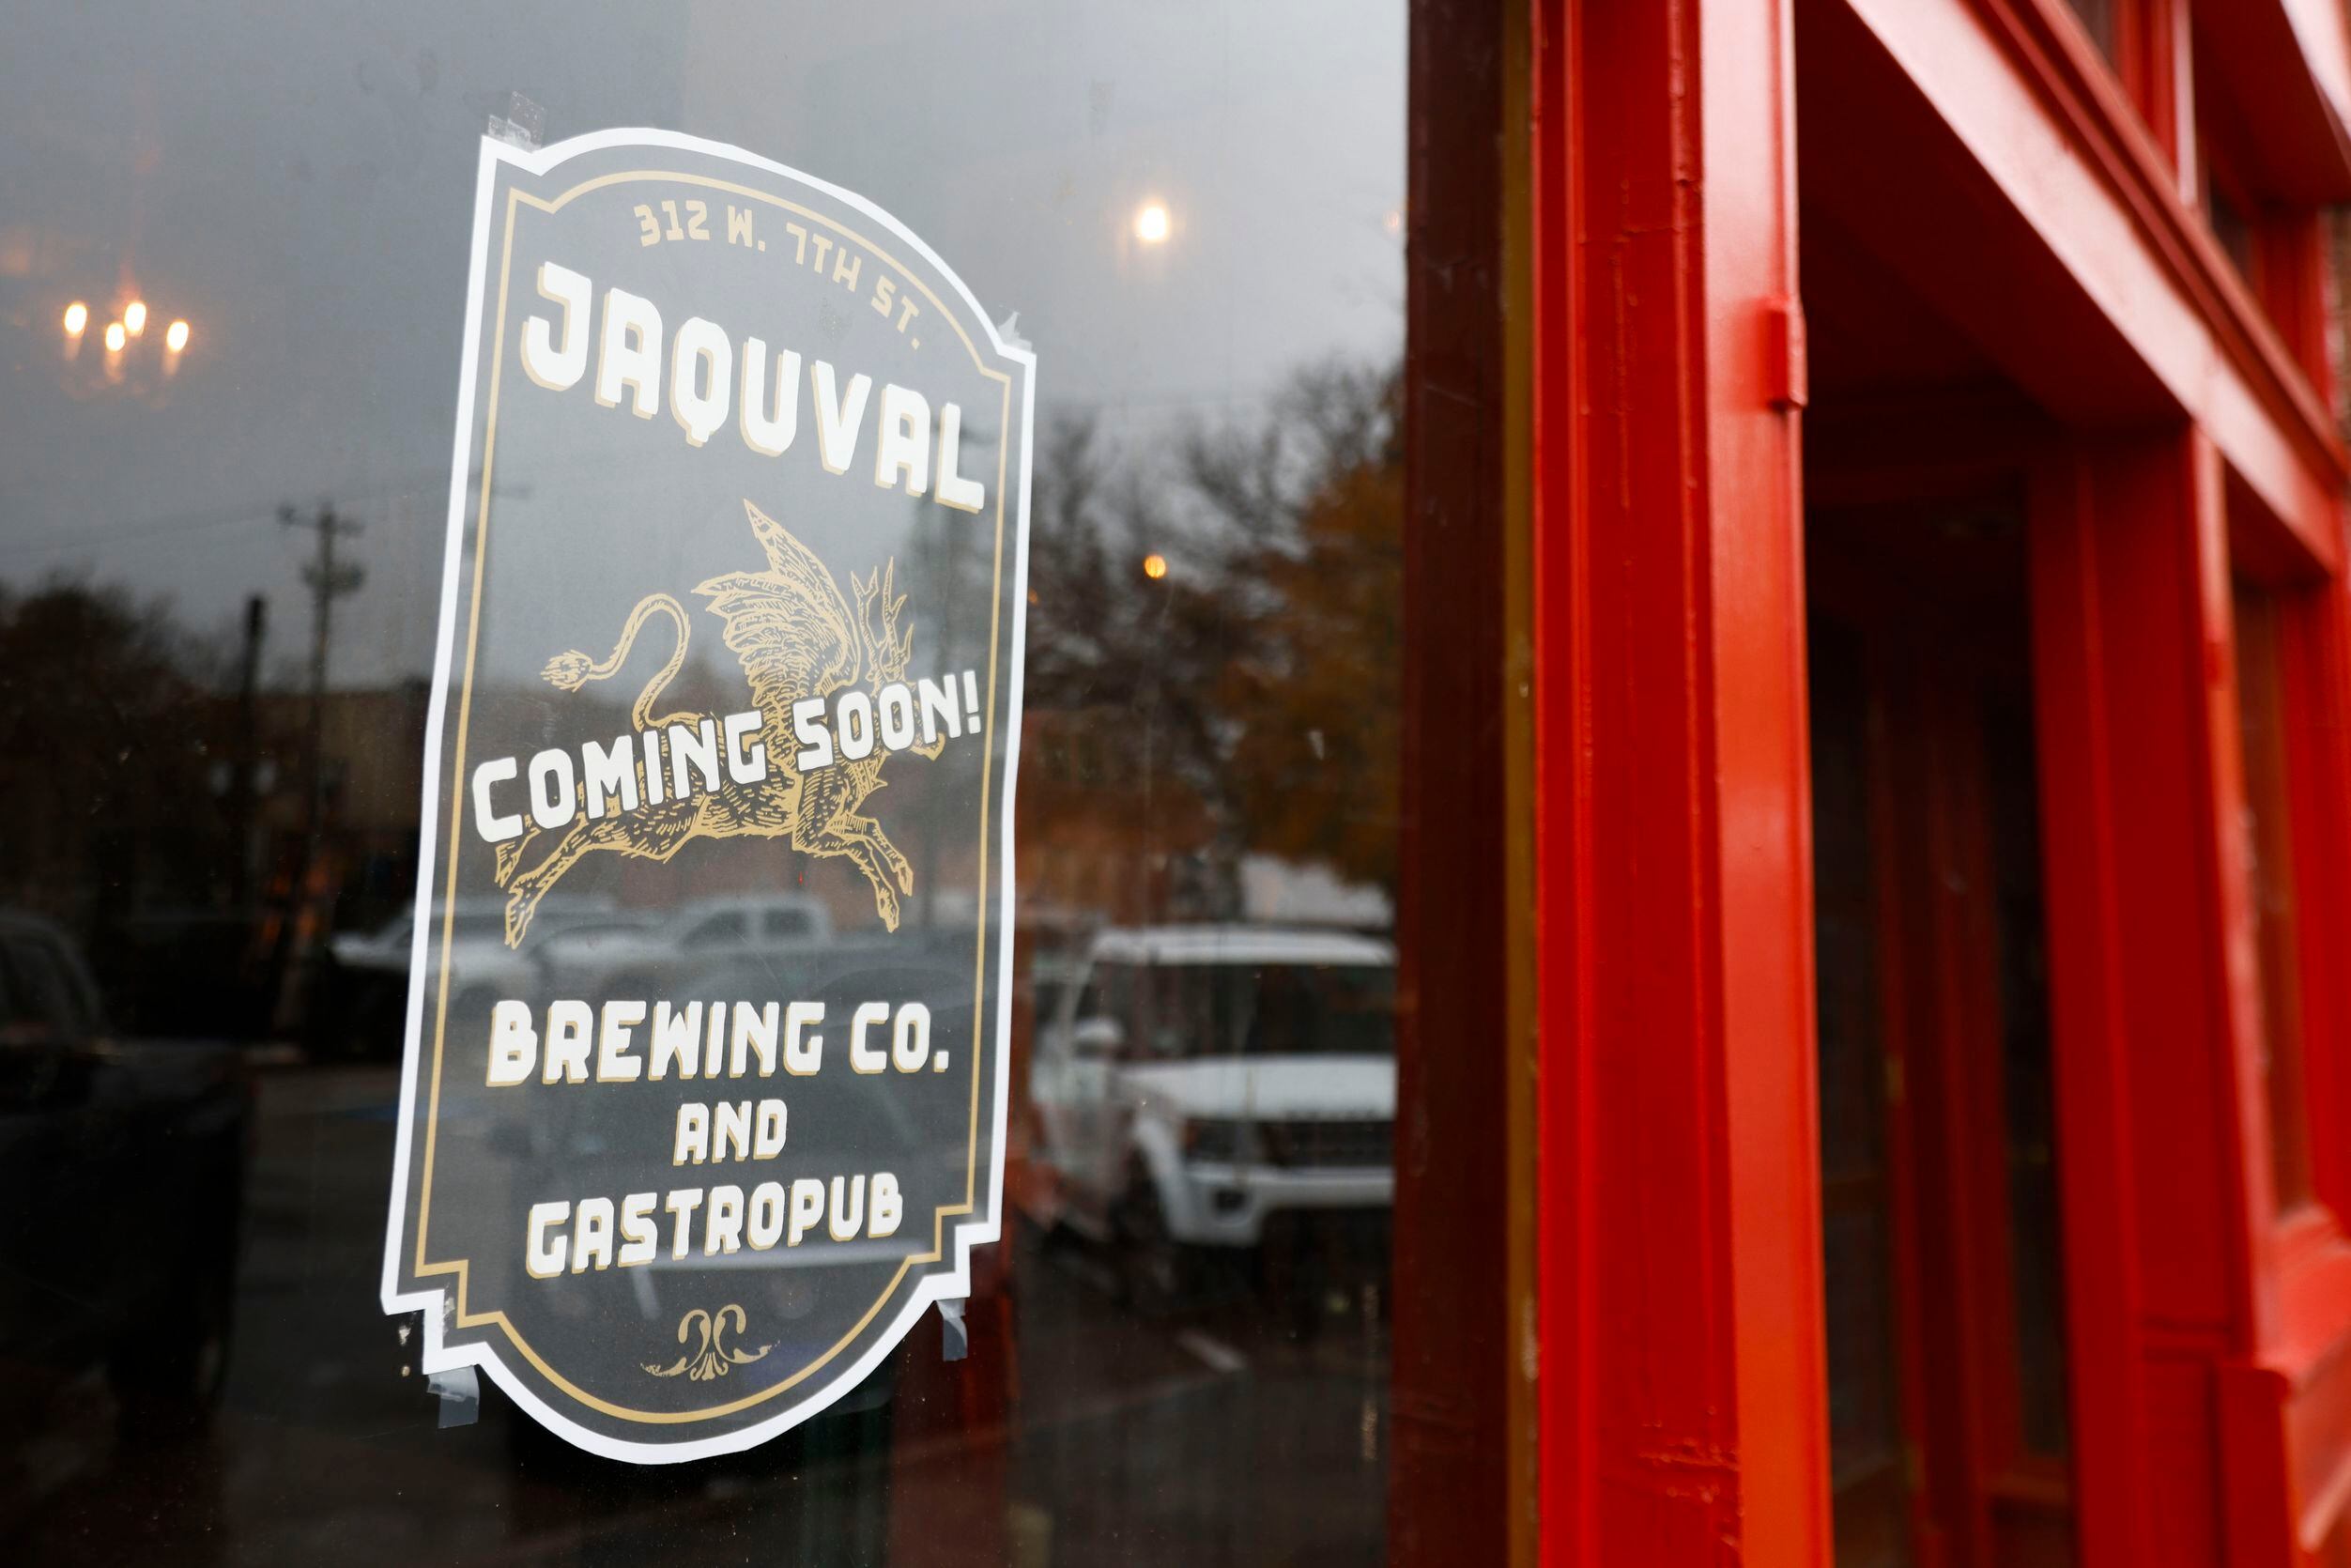 Coming Soon poster hang on the entrance of Jaquval, Brewing co. and Gastropub, on Thursday,...